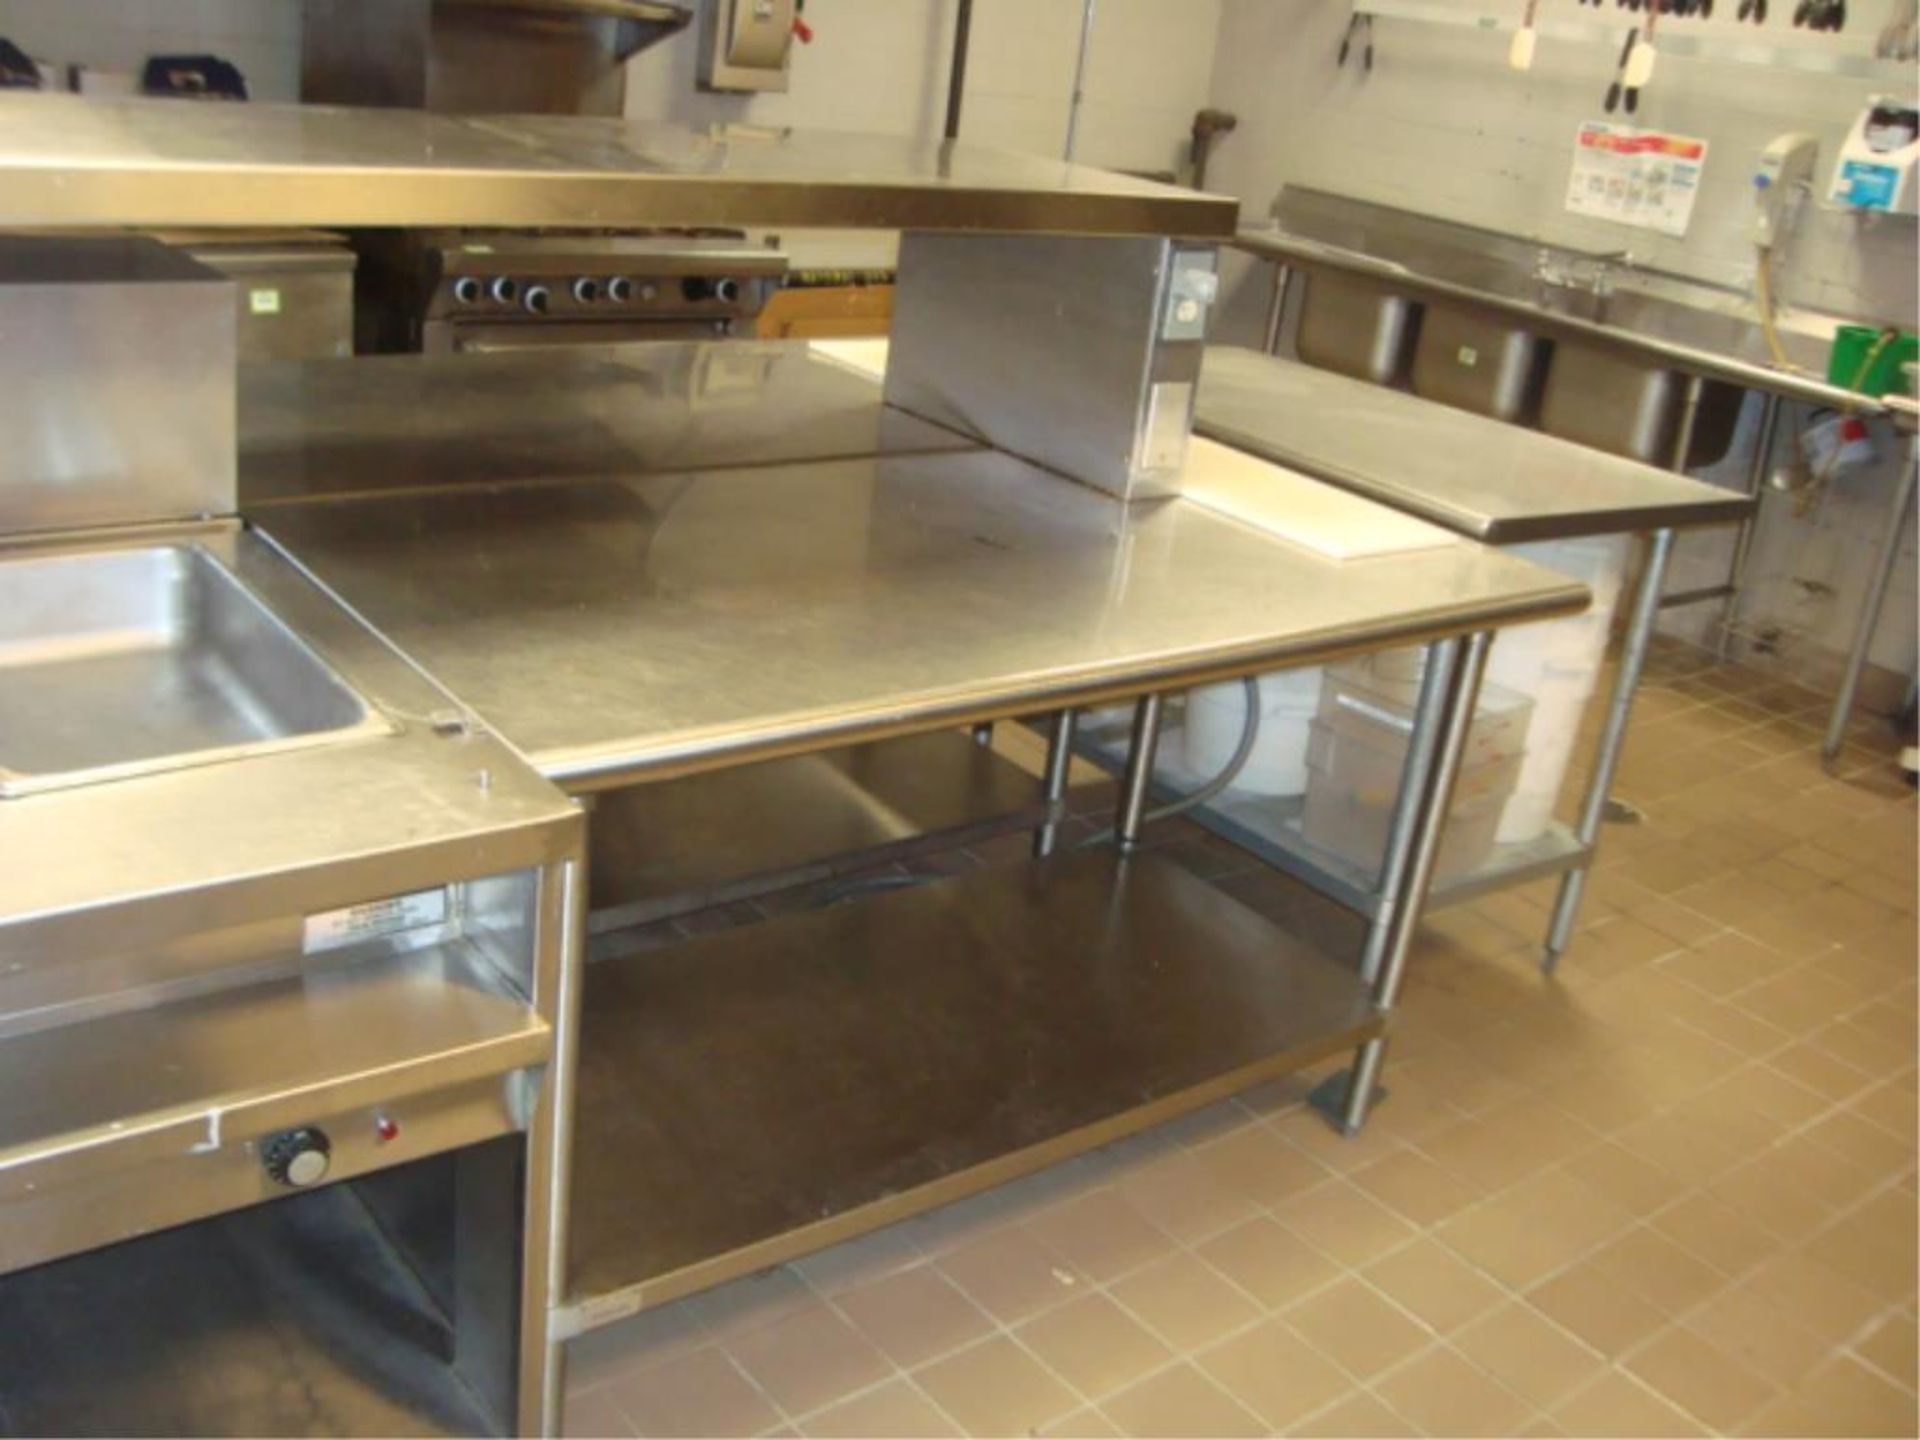 SS Cafeteria Food Preparation Station - Image 10 of 13